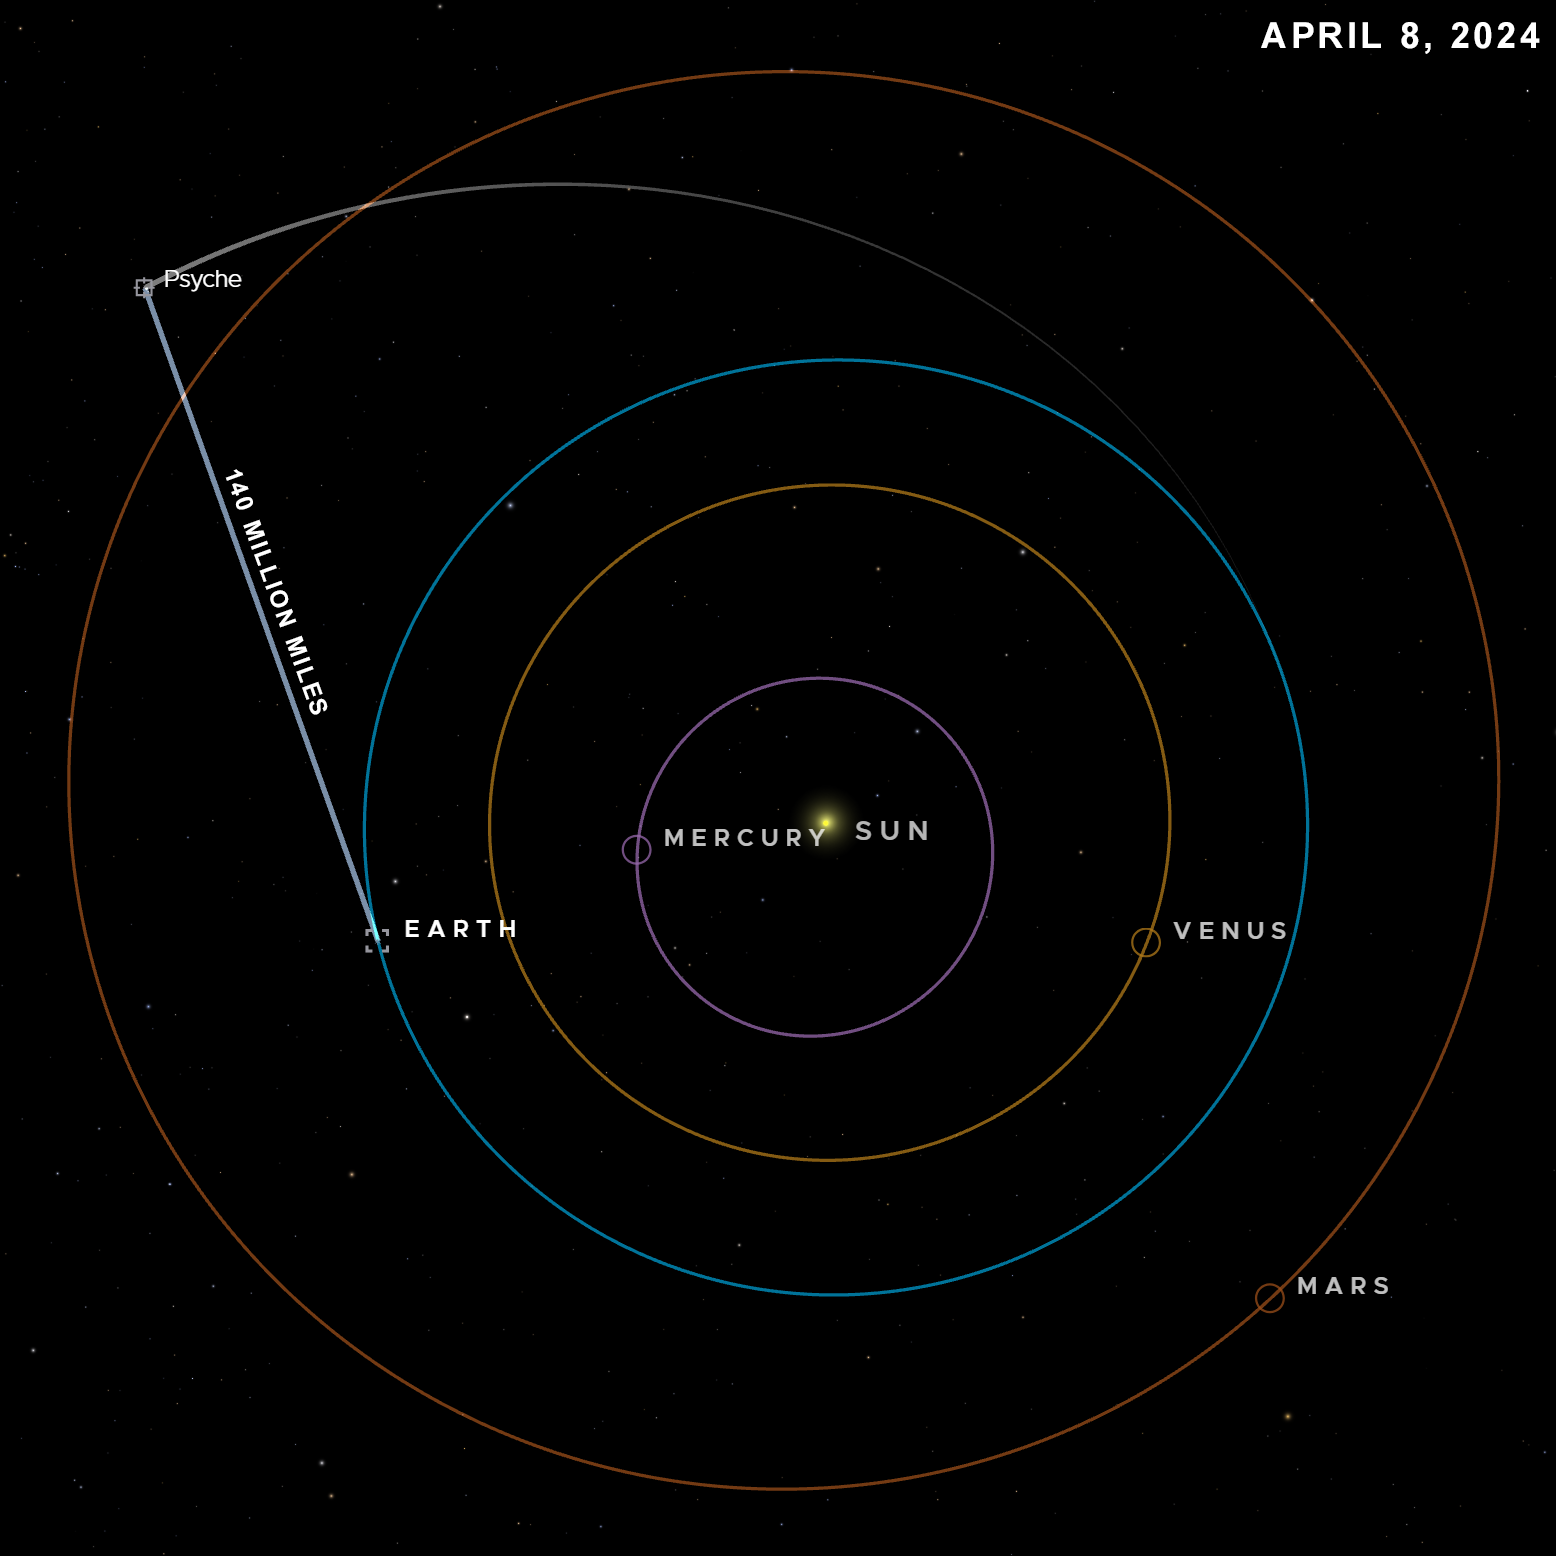 Diagram showing the orbits of mercury, venus, earth, and mars around the sun with a labeled point indicating the psyche spacecraft on april 8, 2024